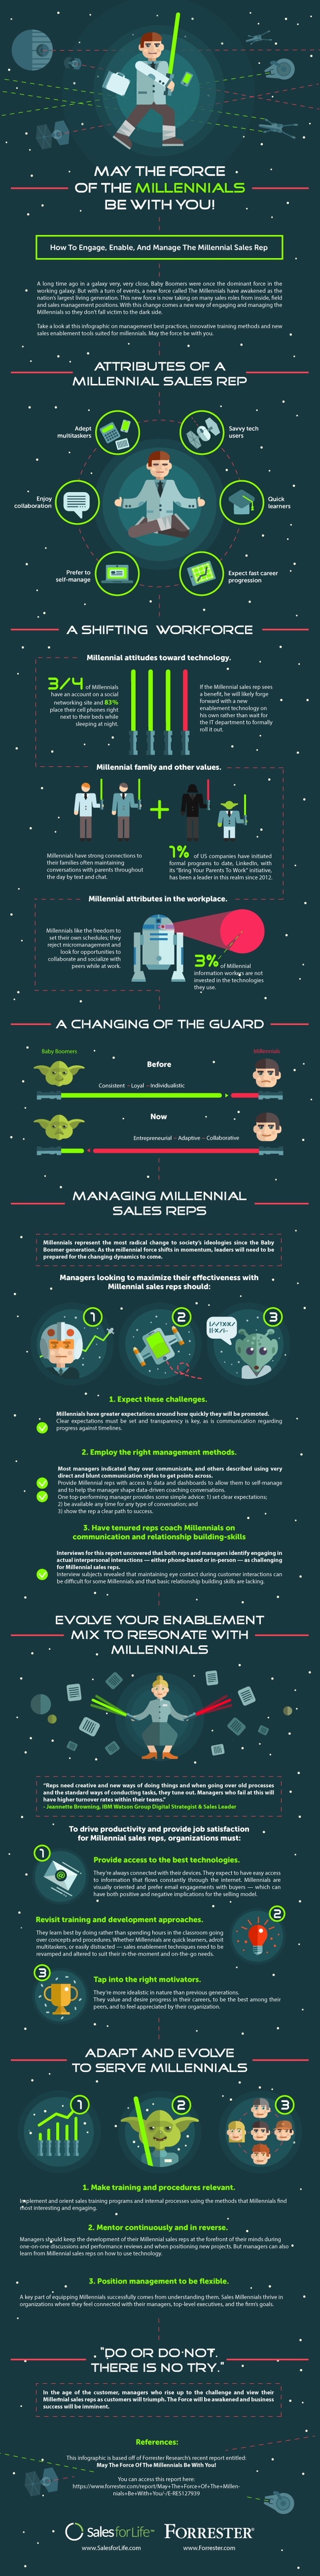 force-of-millennial-sales-infographic.jpg